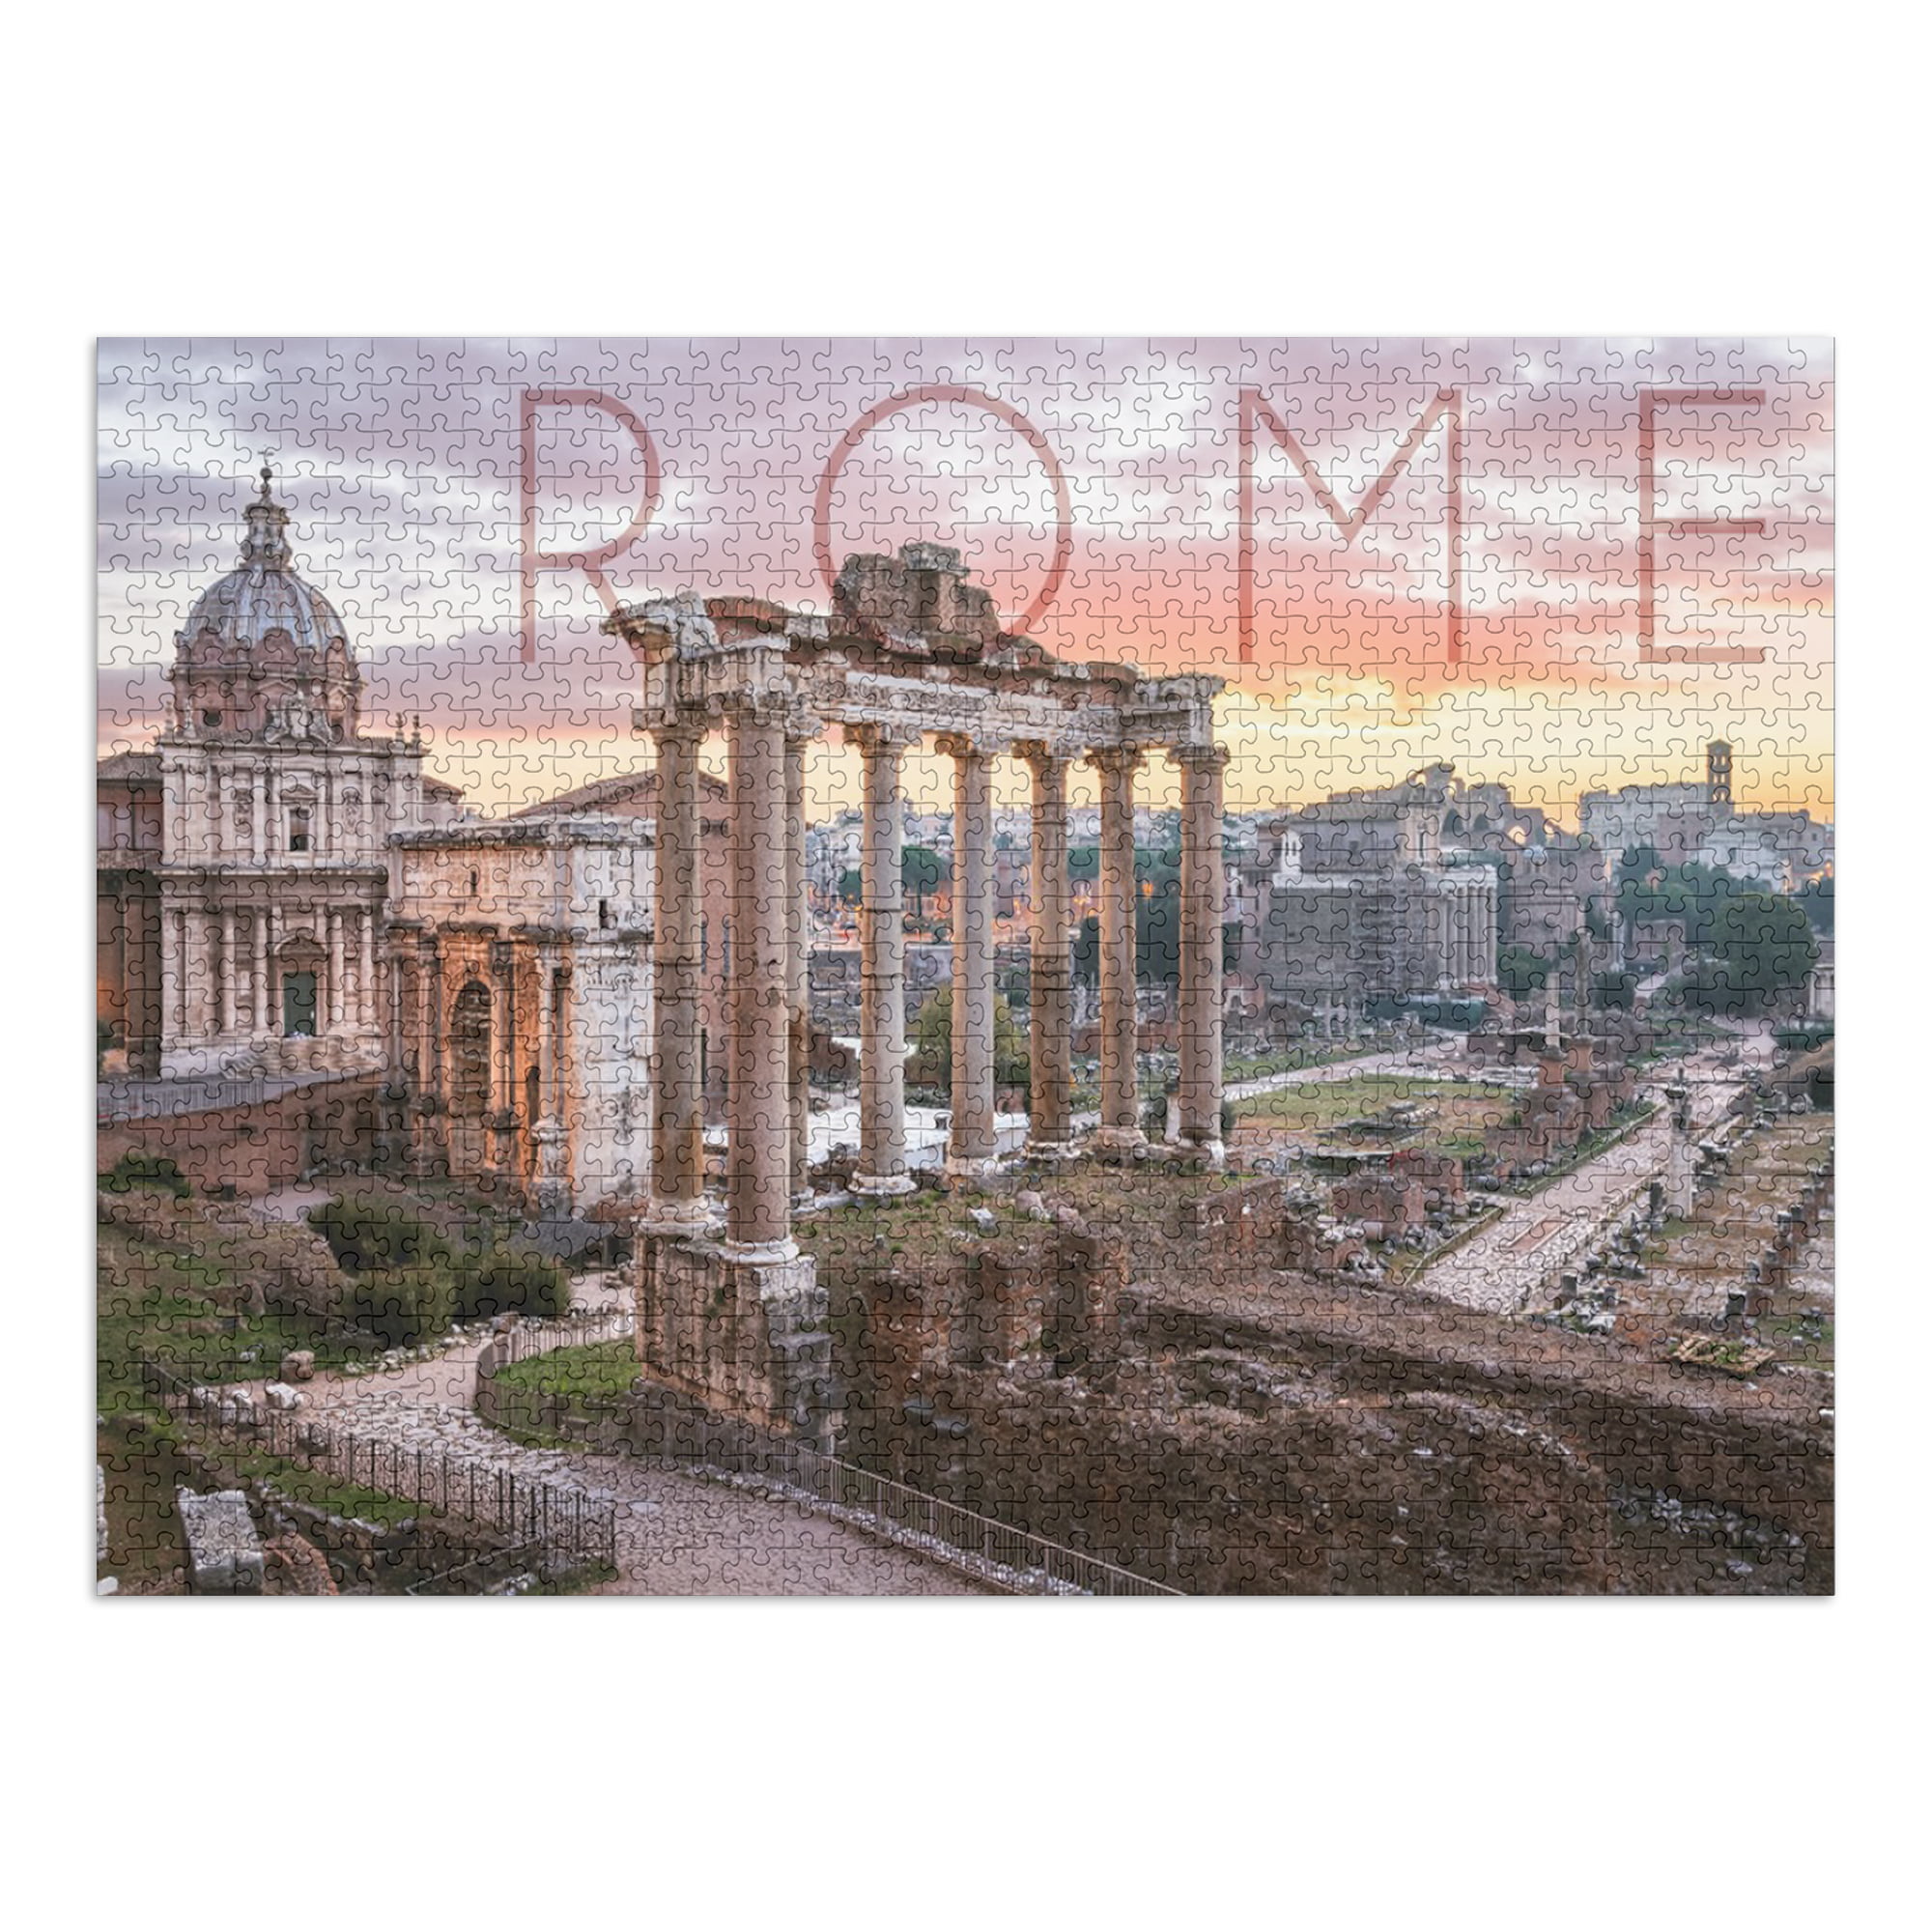 300 Pieces Kid Adult Puzzle Ancient Rome Colosseum Jigsaw Educational Toys Gift 